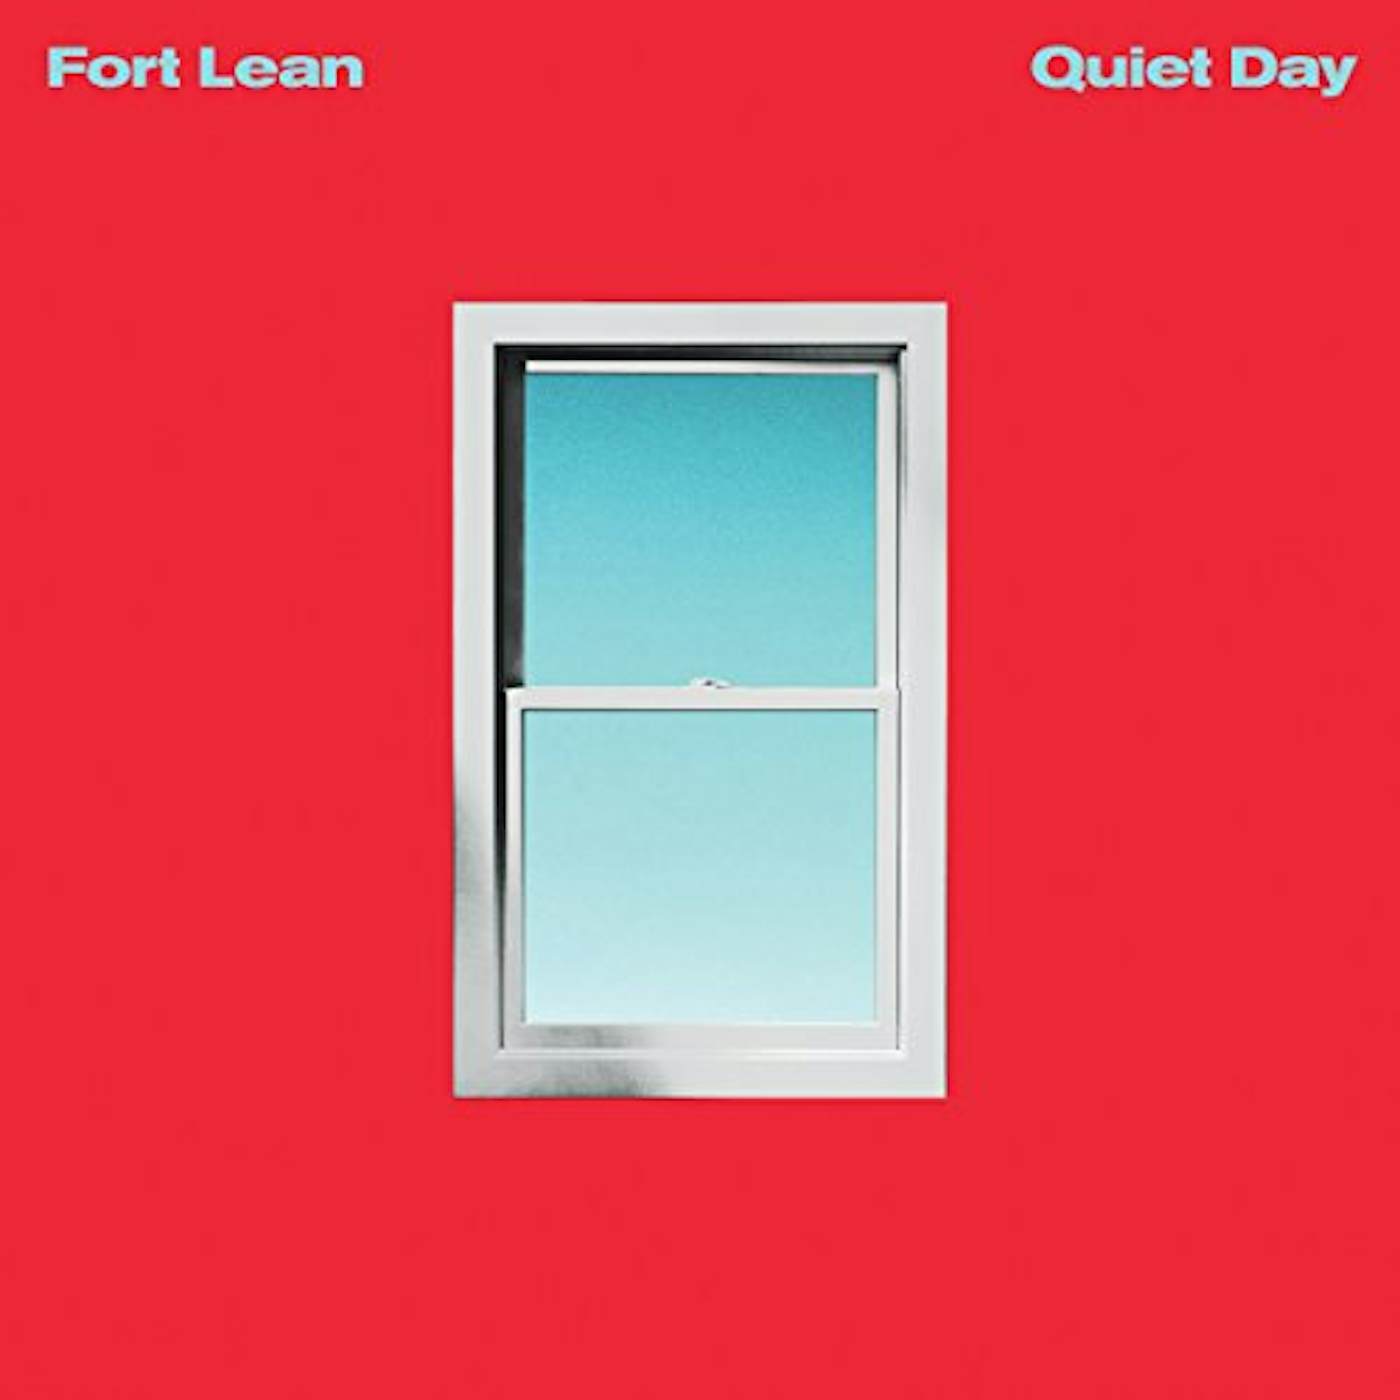 Fort Lean QUIET DAY CD